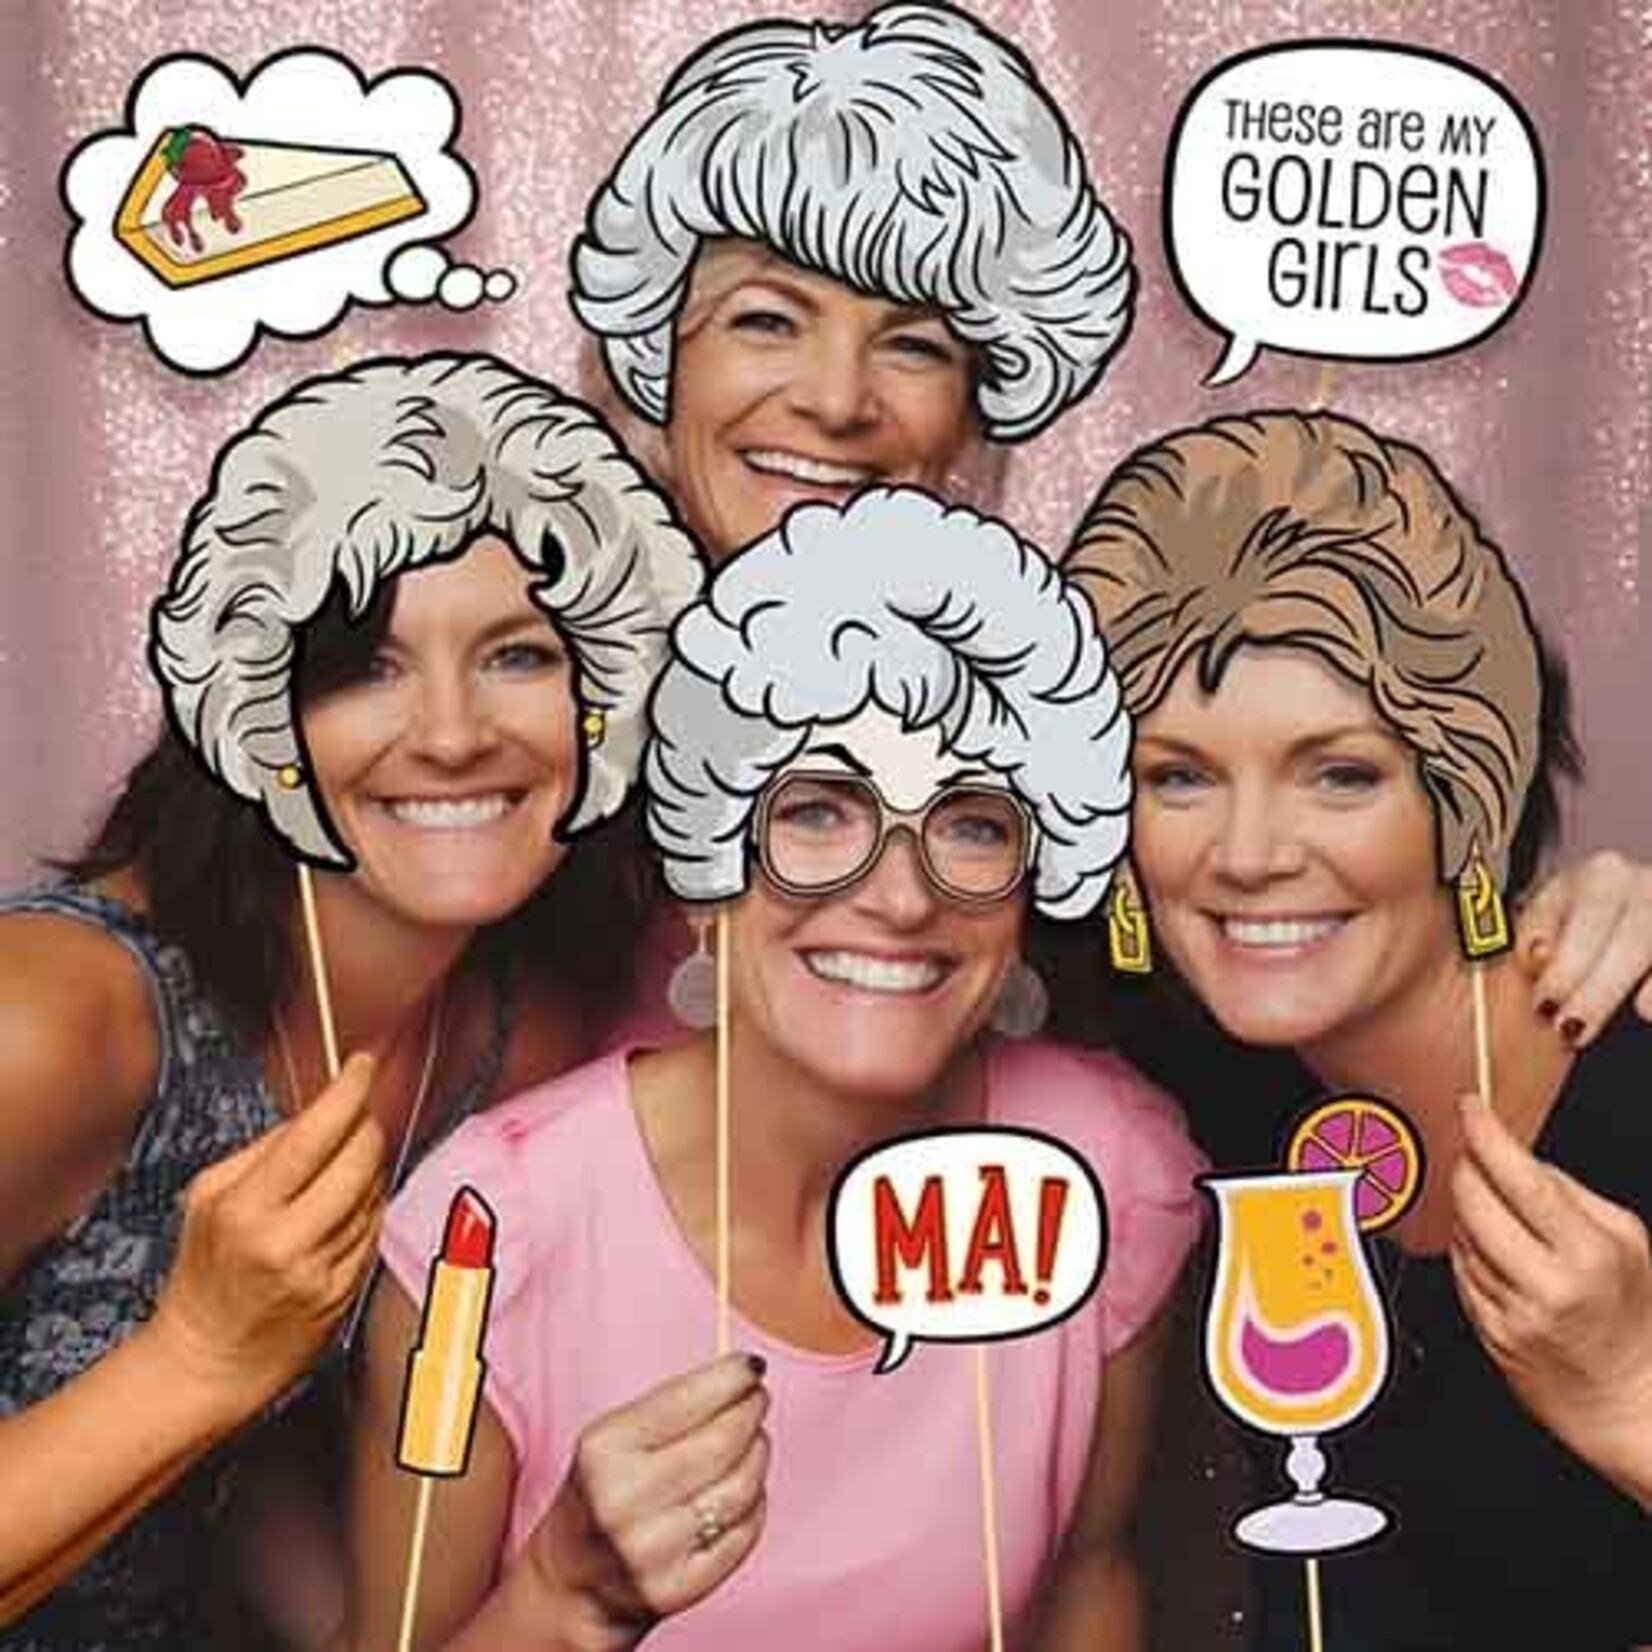 Prime Party The Golden Girls Photo Props - 11ct.